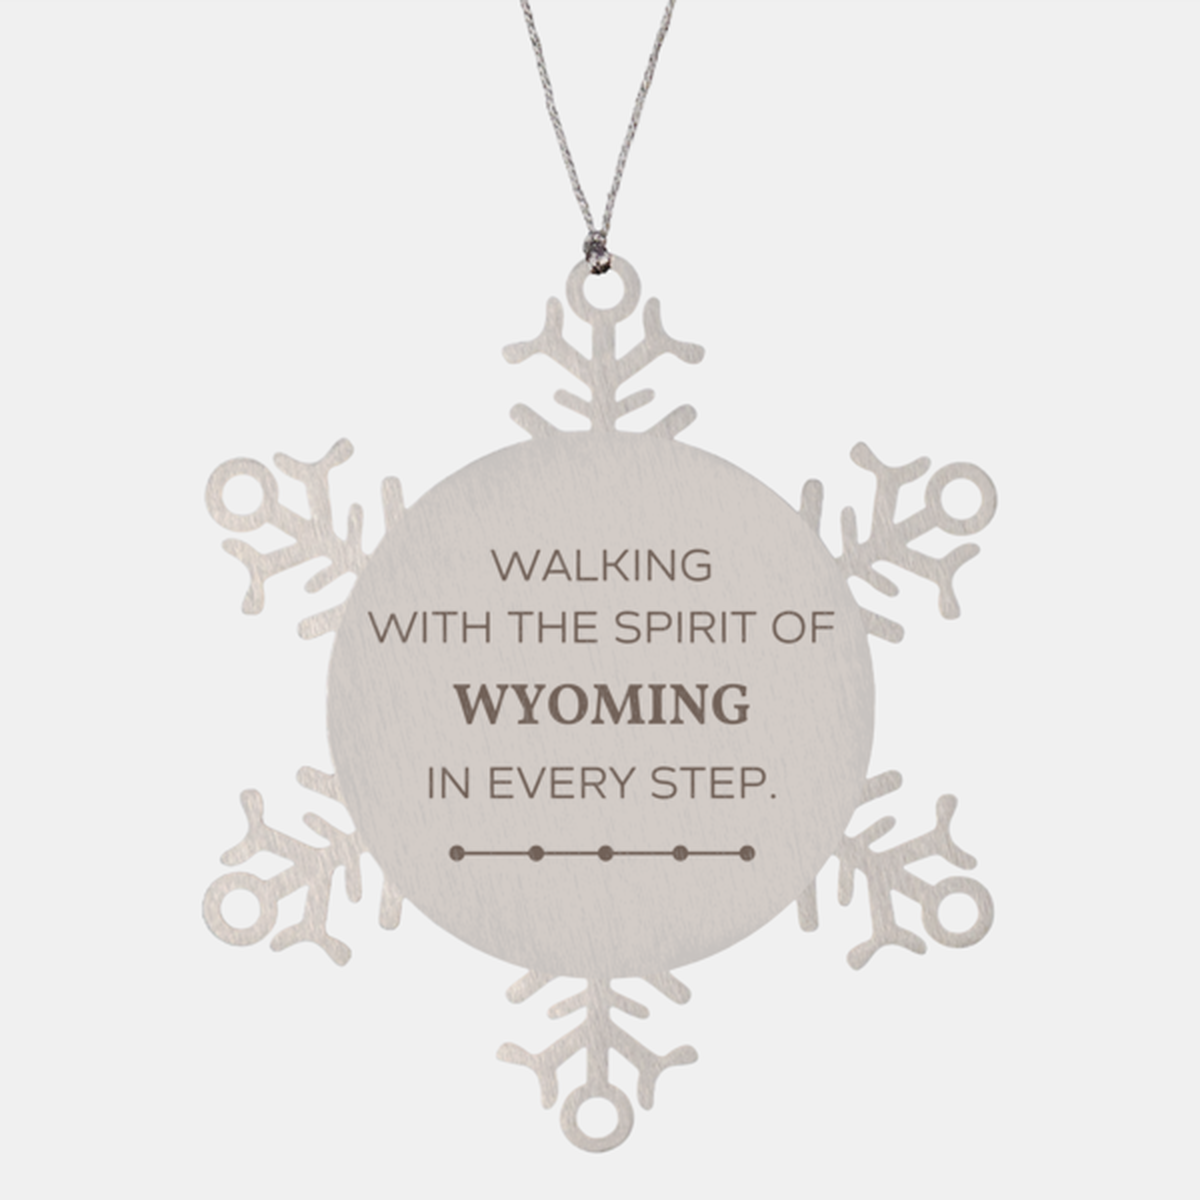 Wyoming Gifts, Walking with the spirit, Love Wyoming Birthday Christmas Snowflake Ornament For Wyoming People, Men, Women, Friends